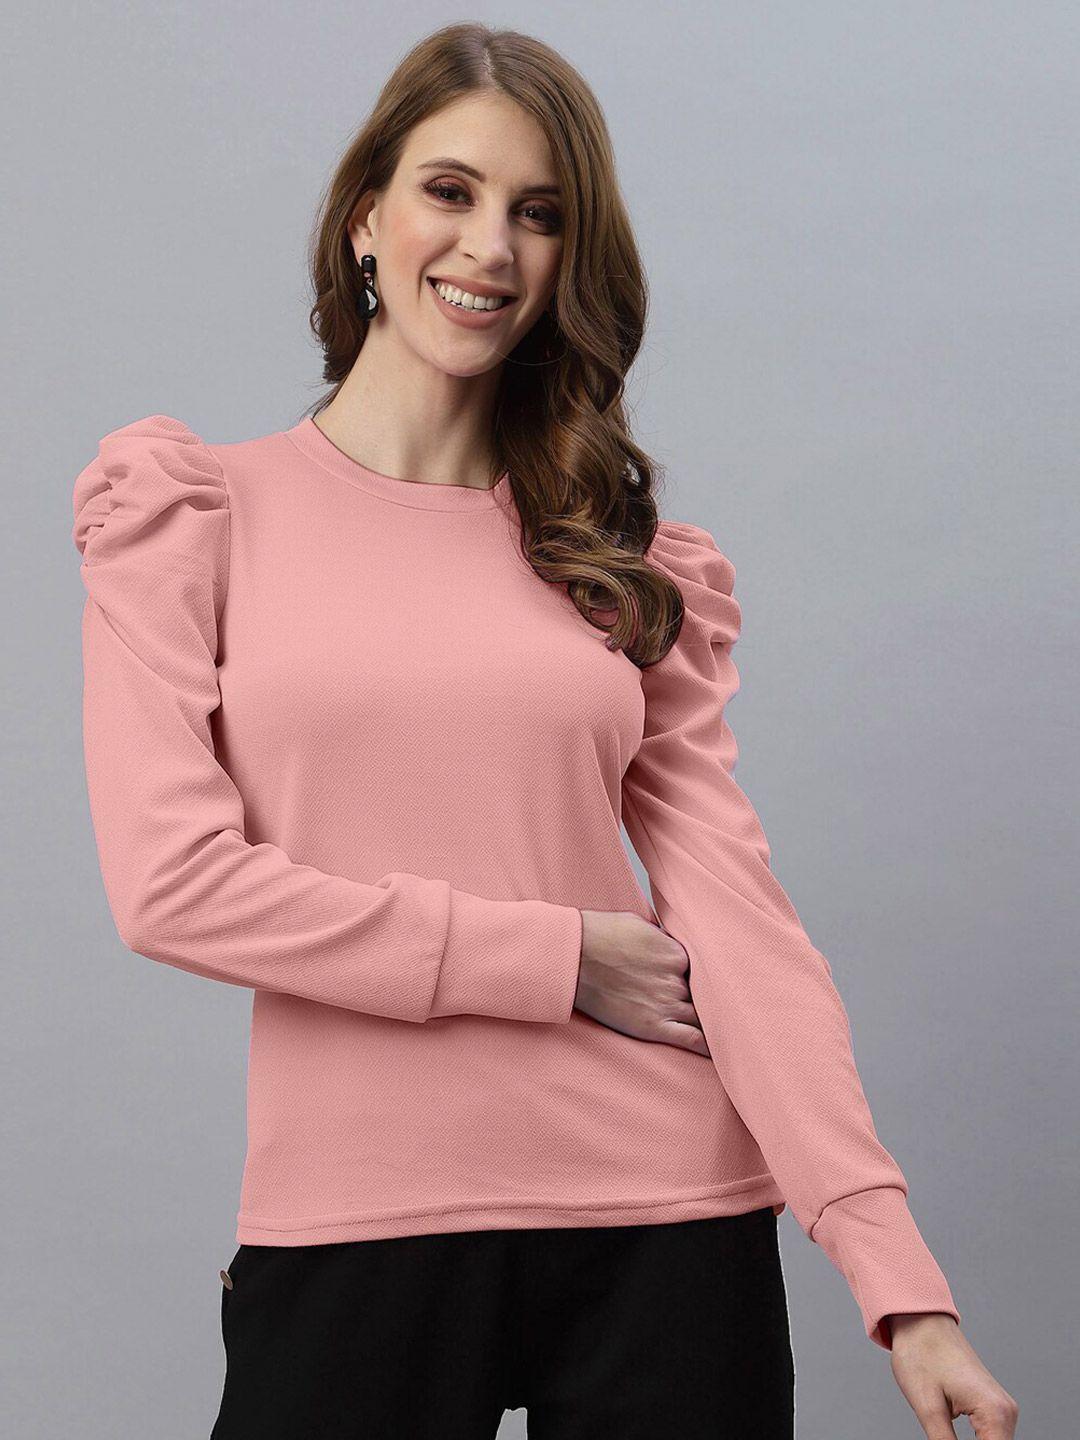 selvia peach-coloured bishop sleeves scuba lace top